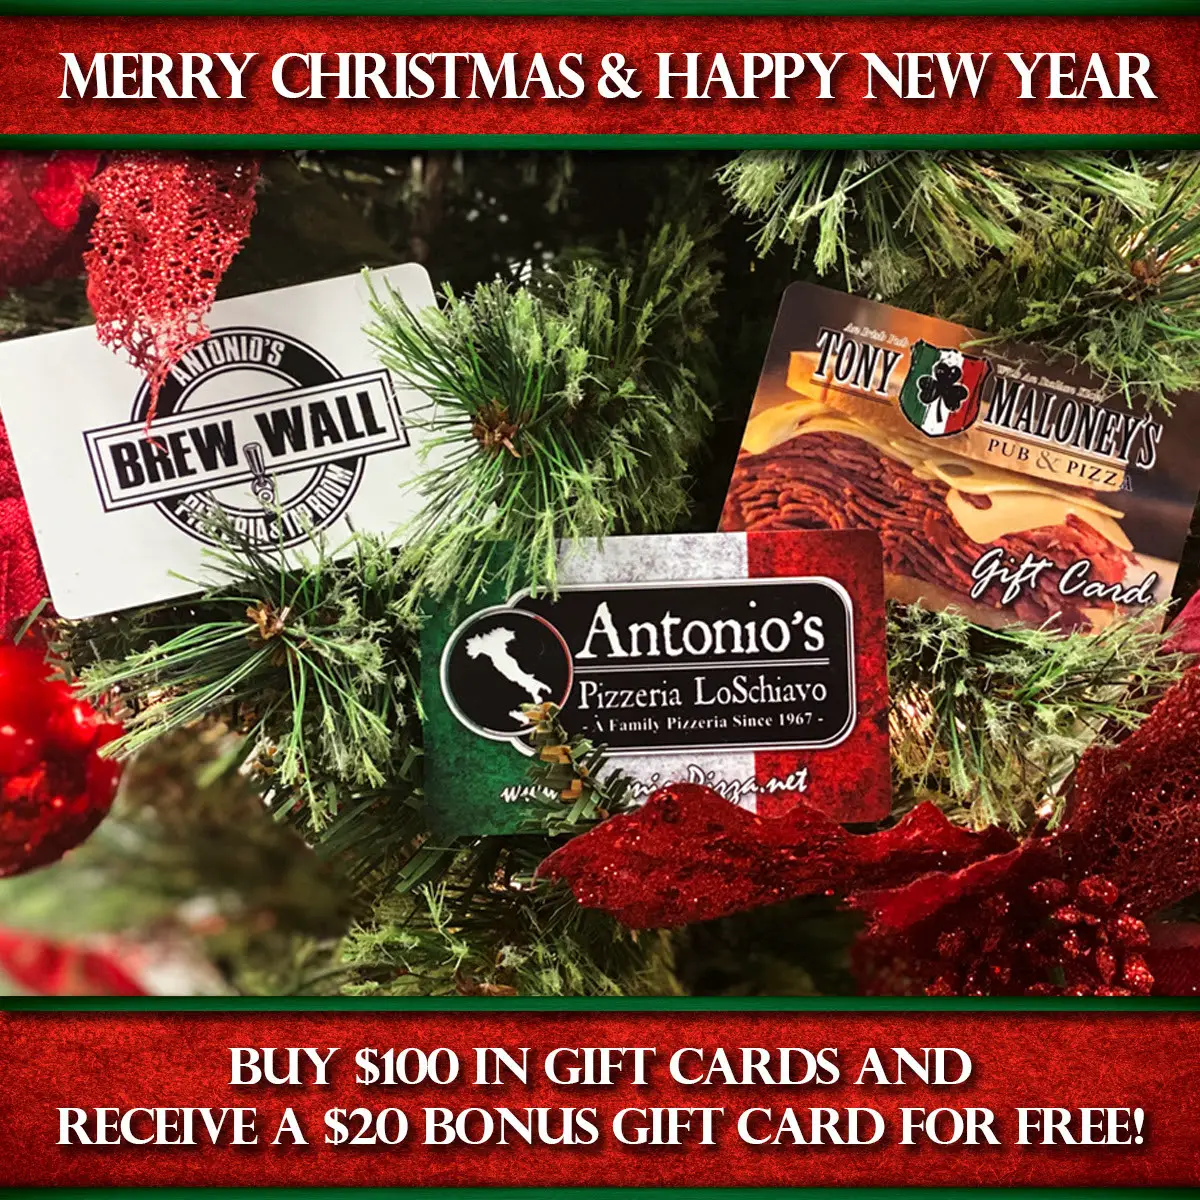 Antonio's Pizza New Years Buy $100 Gift Cards, Get $20 Bonus Card for Free